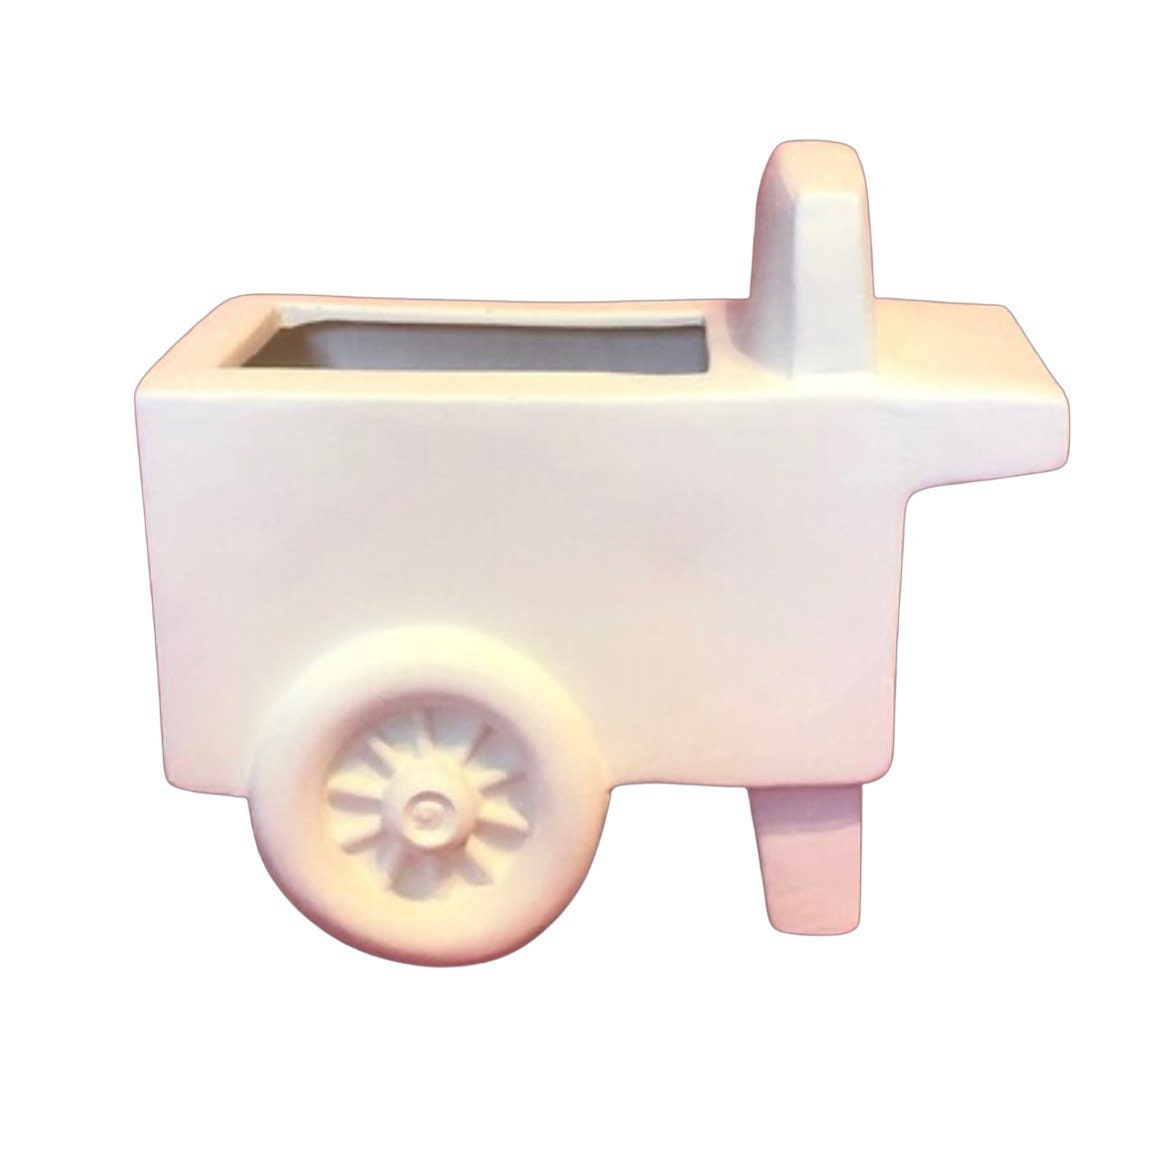 CLEARANCE 4214 Yeti for Pickup 5.5”T x 5”W - Pickup sold separately - Paint  Your Own Adorable Ceramic Keepsake